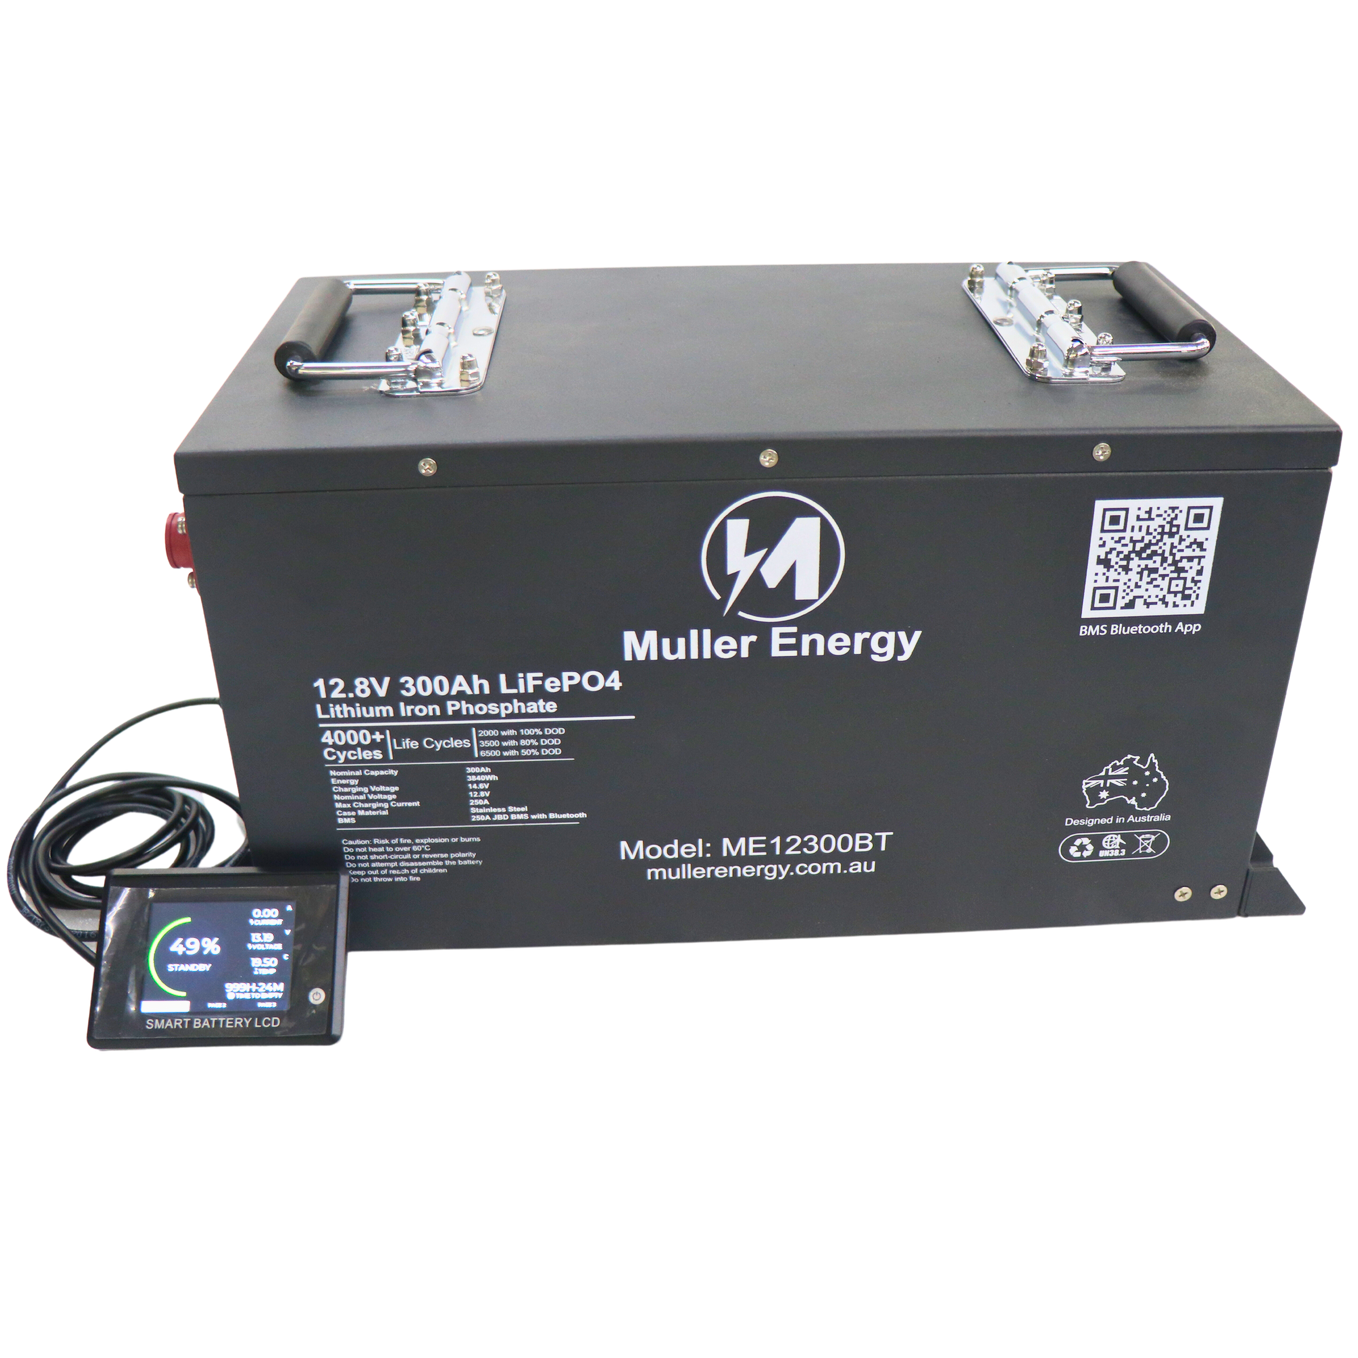 Muller Energy 12V 300Ah Lithium Battery LiFePO4 with Touchscreen